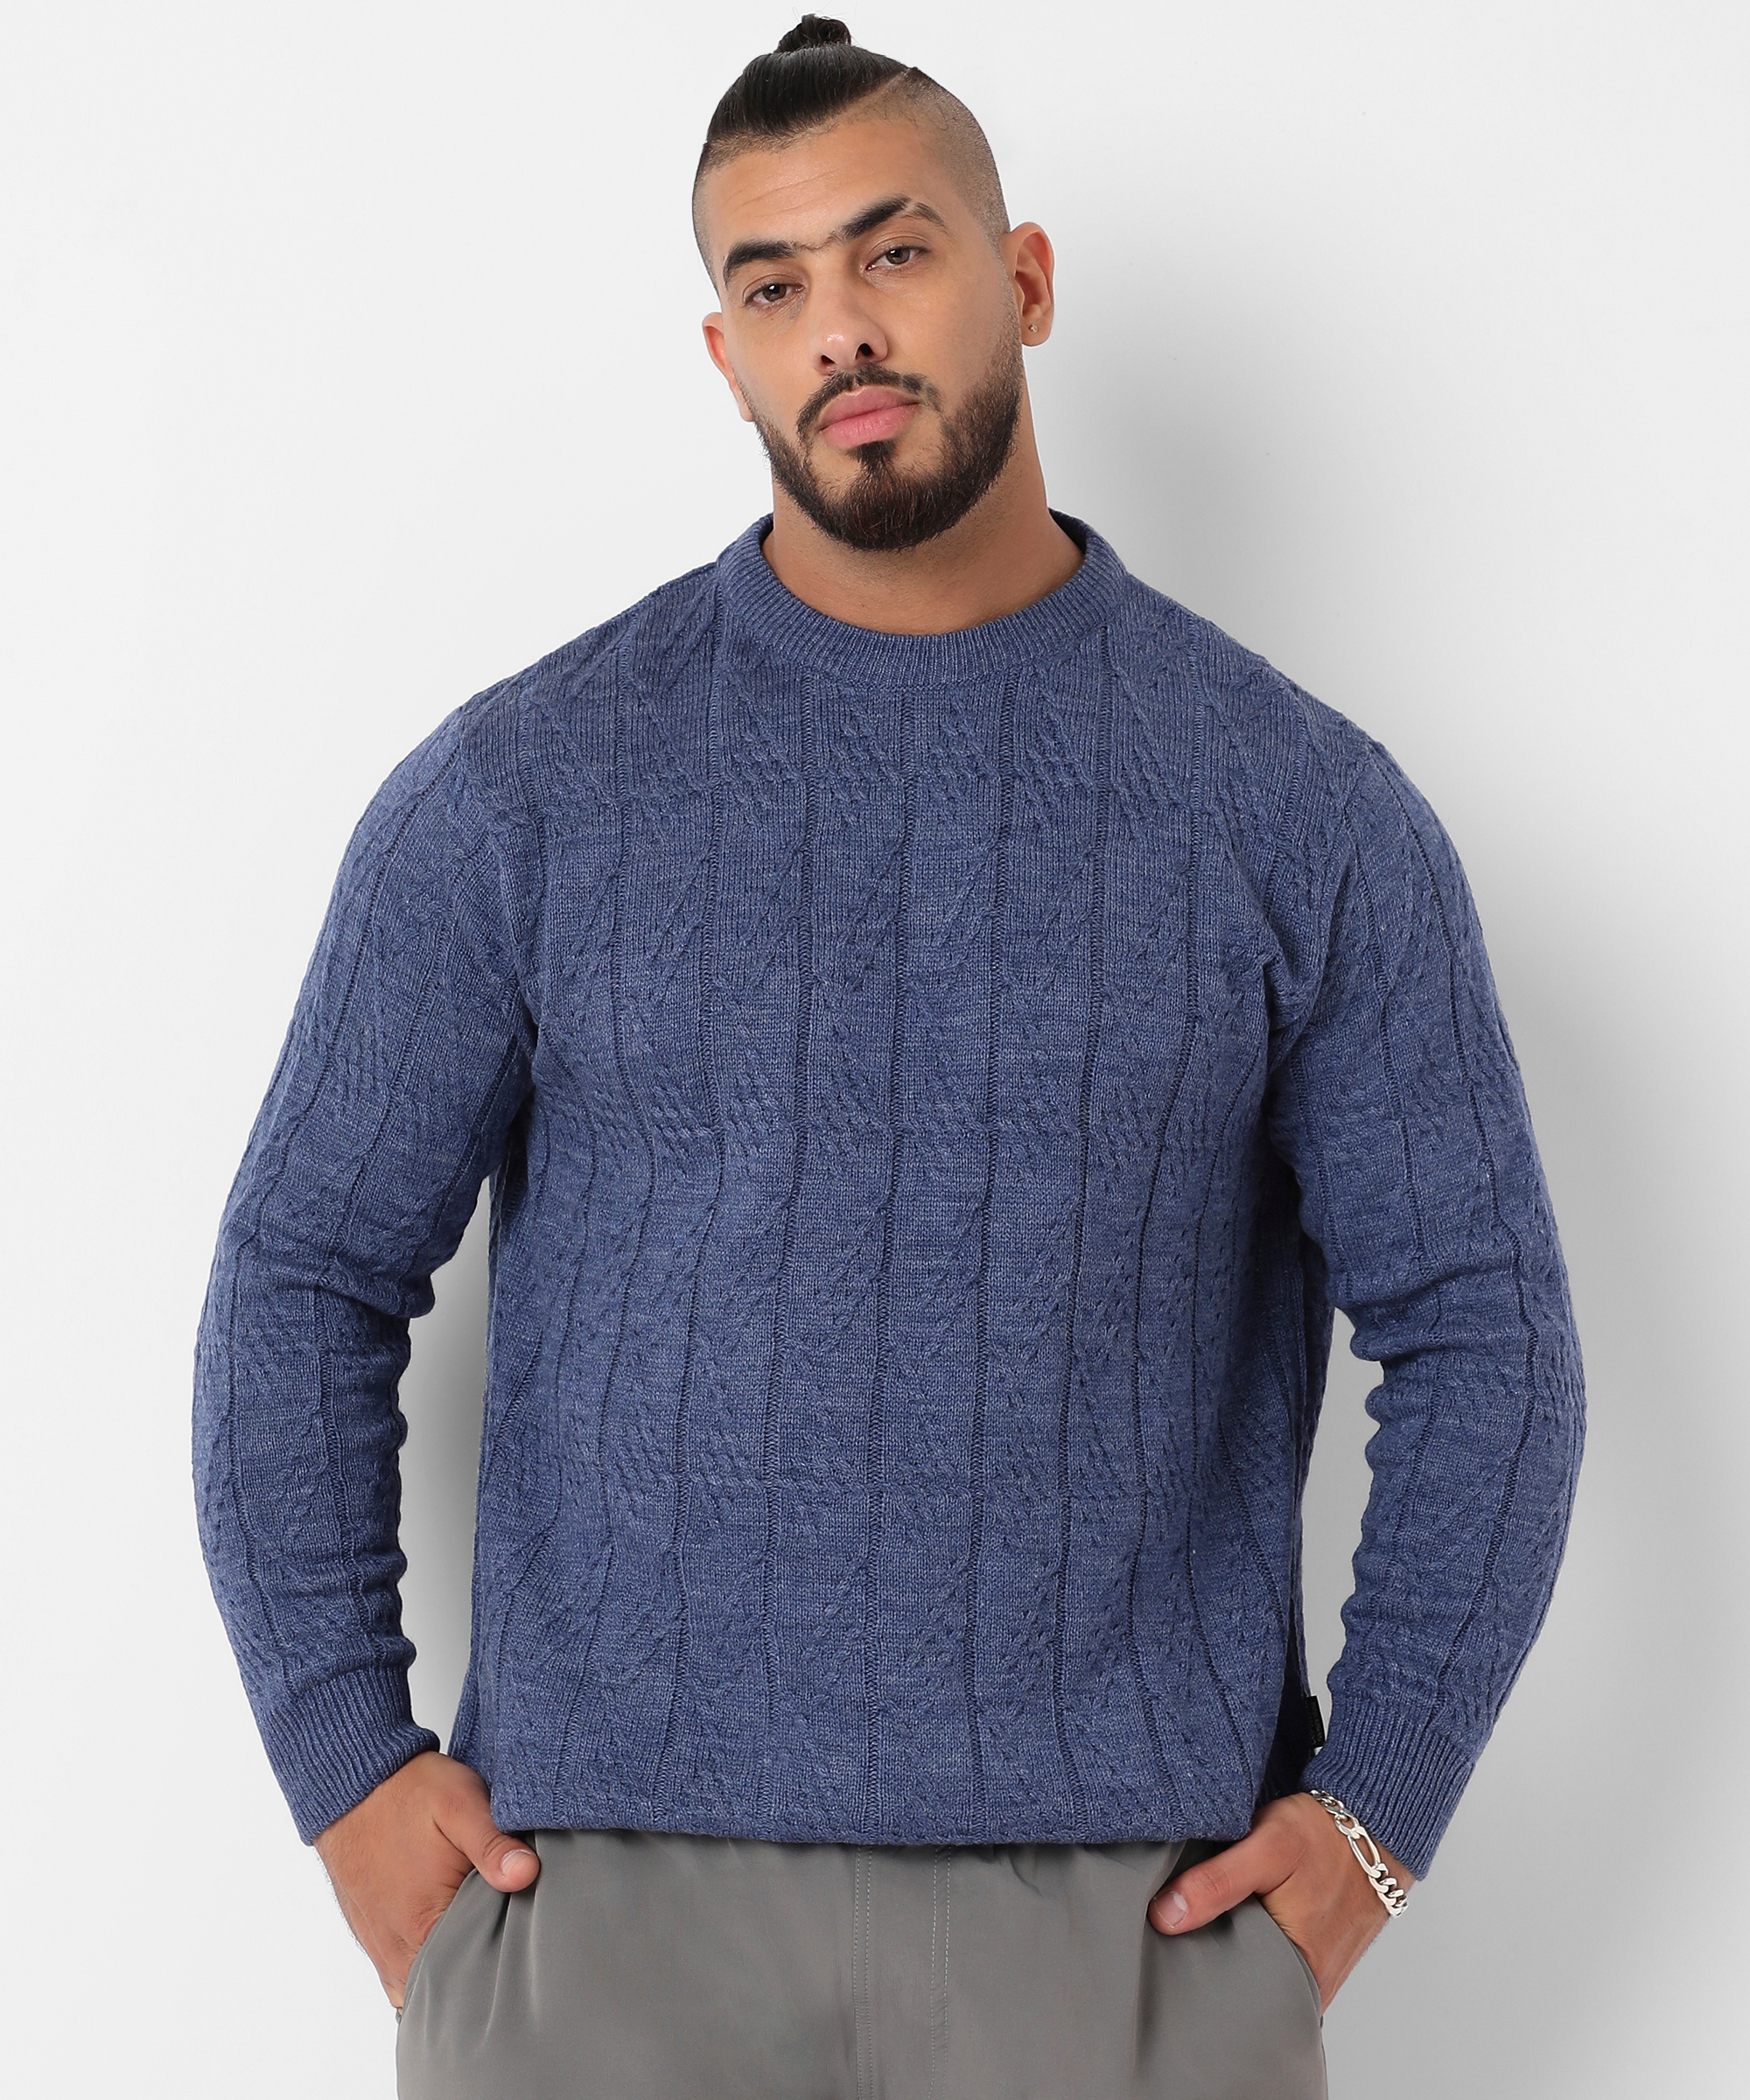 Men's Blue Textured Knit Pullover Sweater